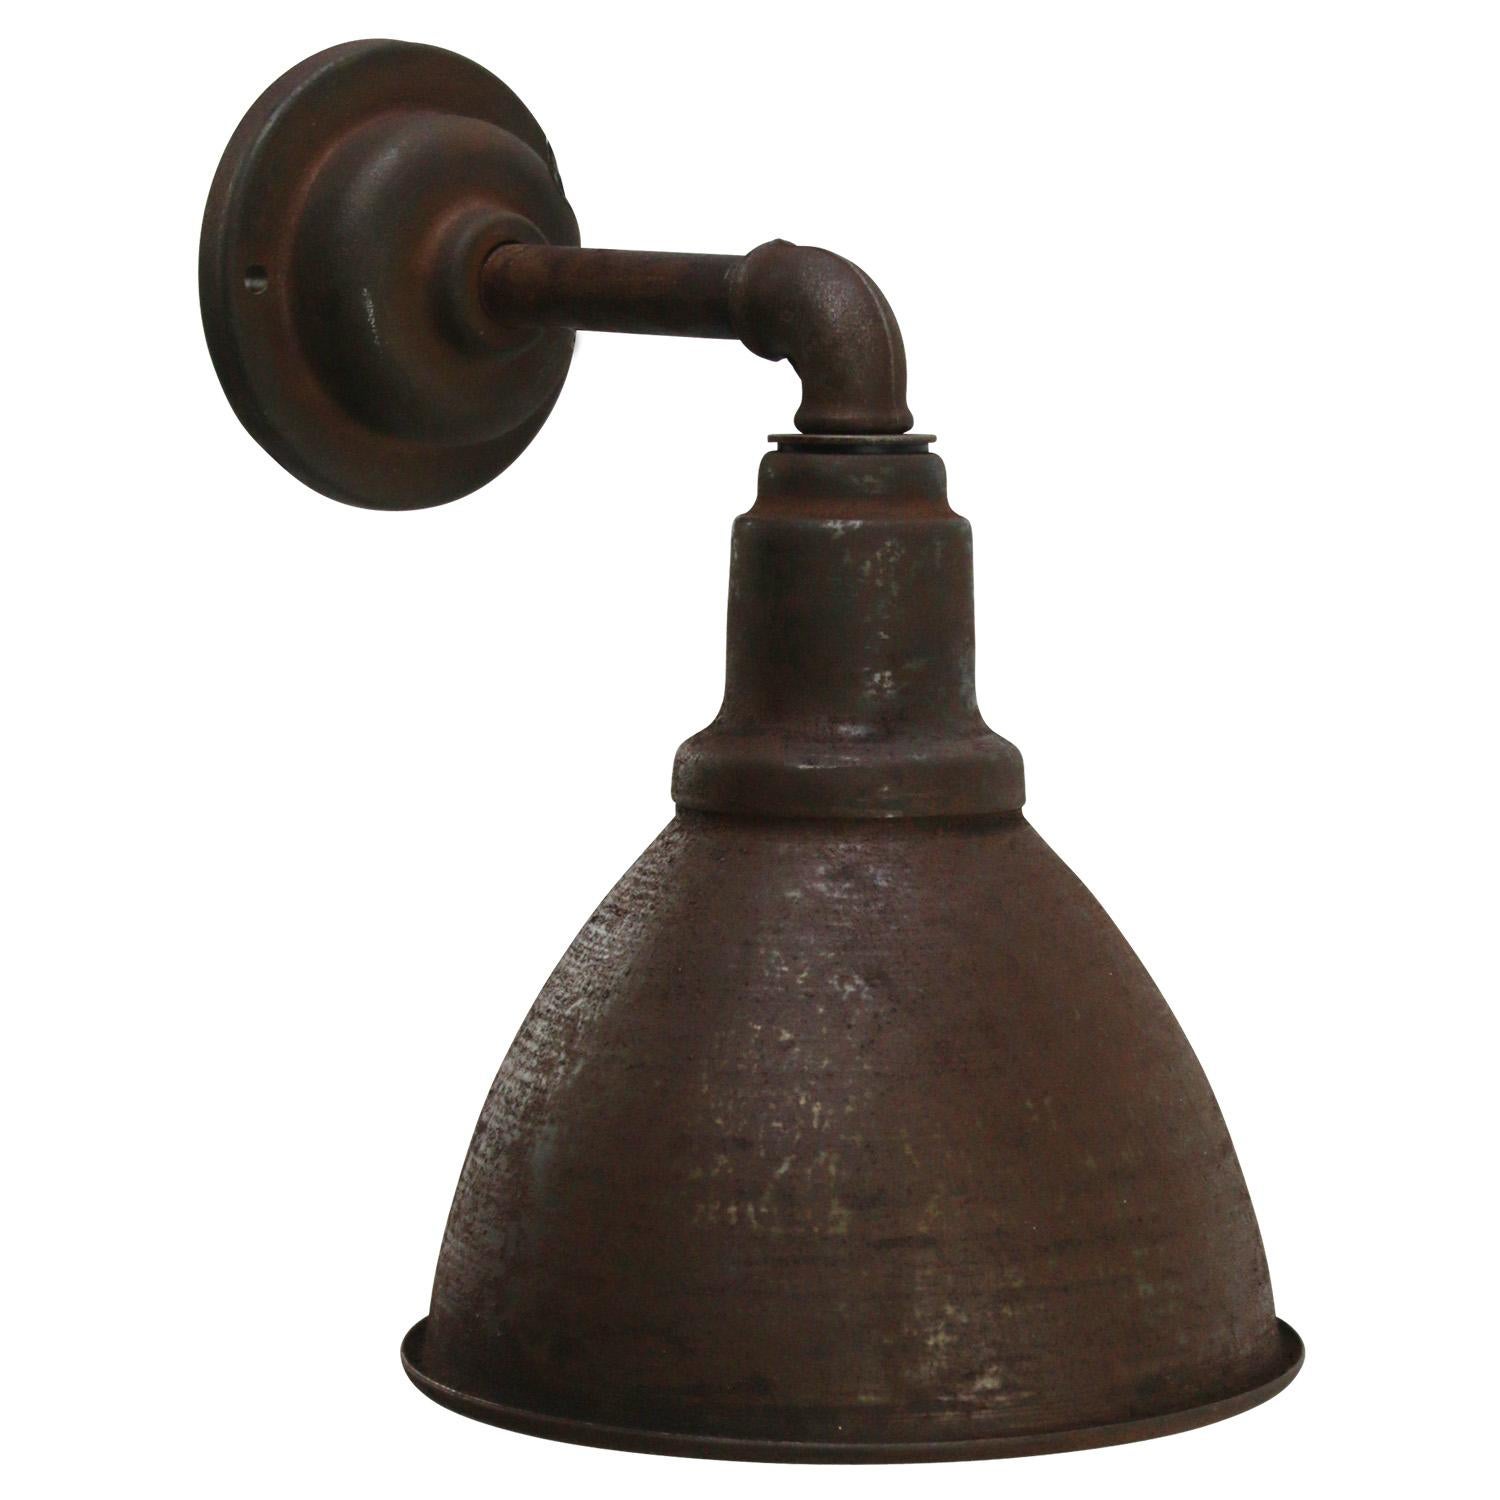 Factory wall light
Iron shade, cast iron arm and wall plate

diameter cast iron wall piece: 10 cm, 2 holes to secure

Weight: 1.80 kg / 4 lb

Priced per individual item. All lamps have been made suitable by international standards for